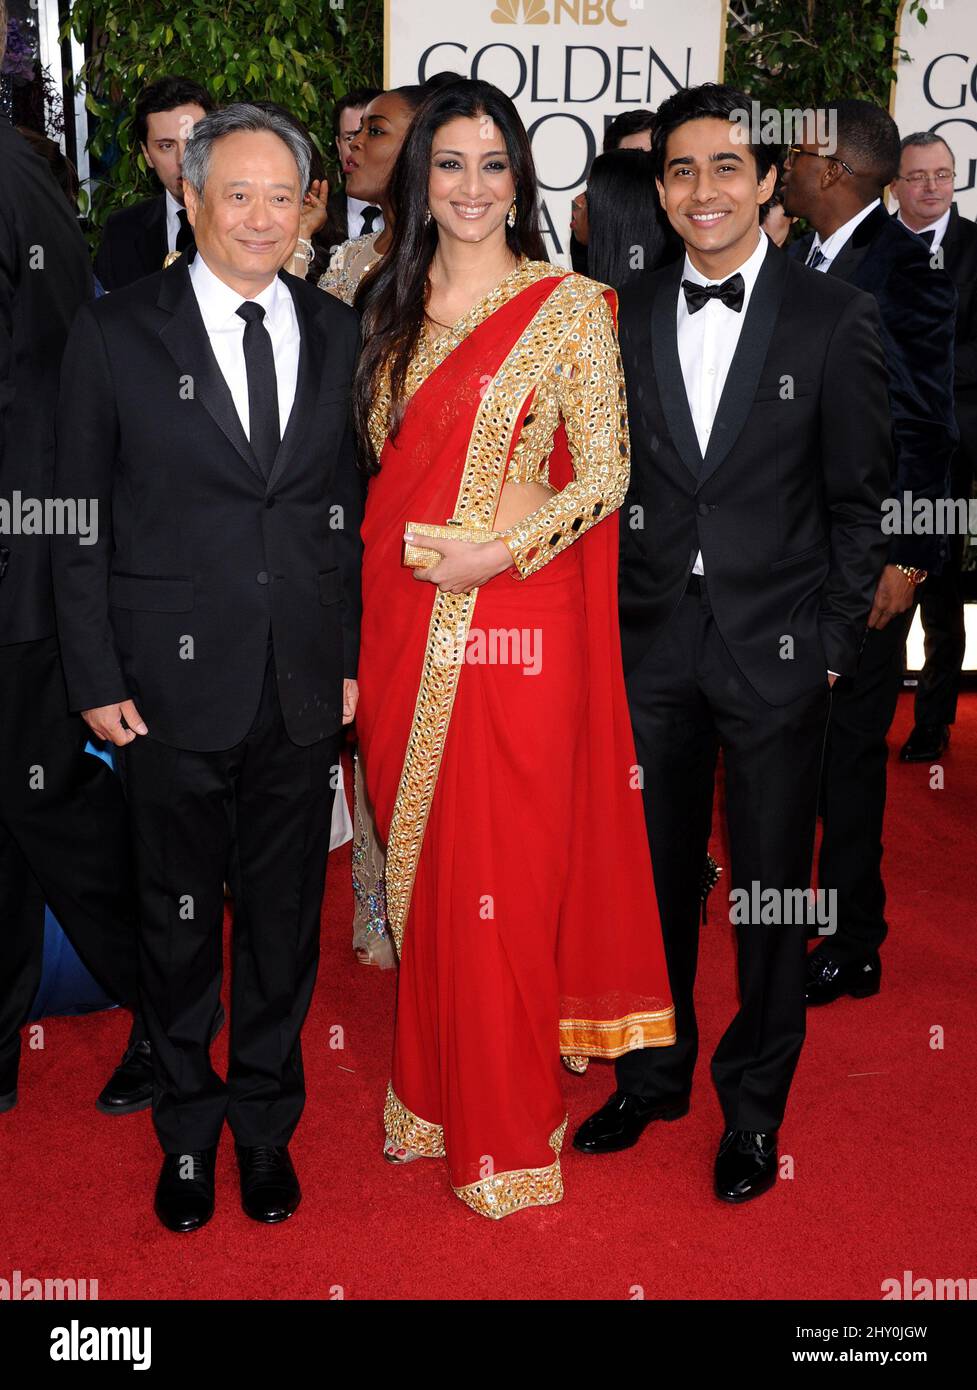 Ang Lee, Tabu and Suraj Sharma arrives at the 70th Annual Golden Globe Awards held at the Beverly Hilton Hotel, Beverly Hills, California on January 13, 2013. Stock Photo